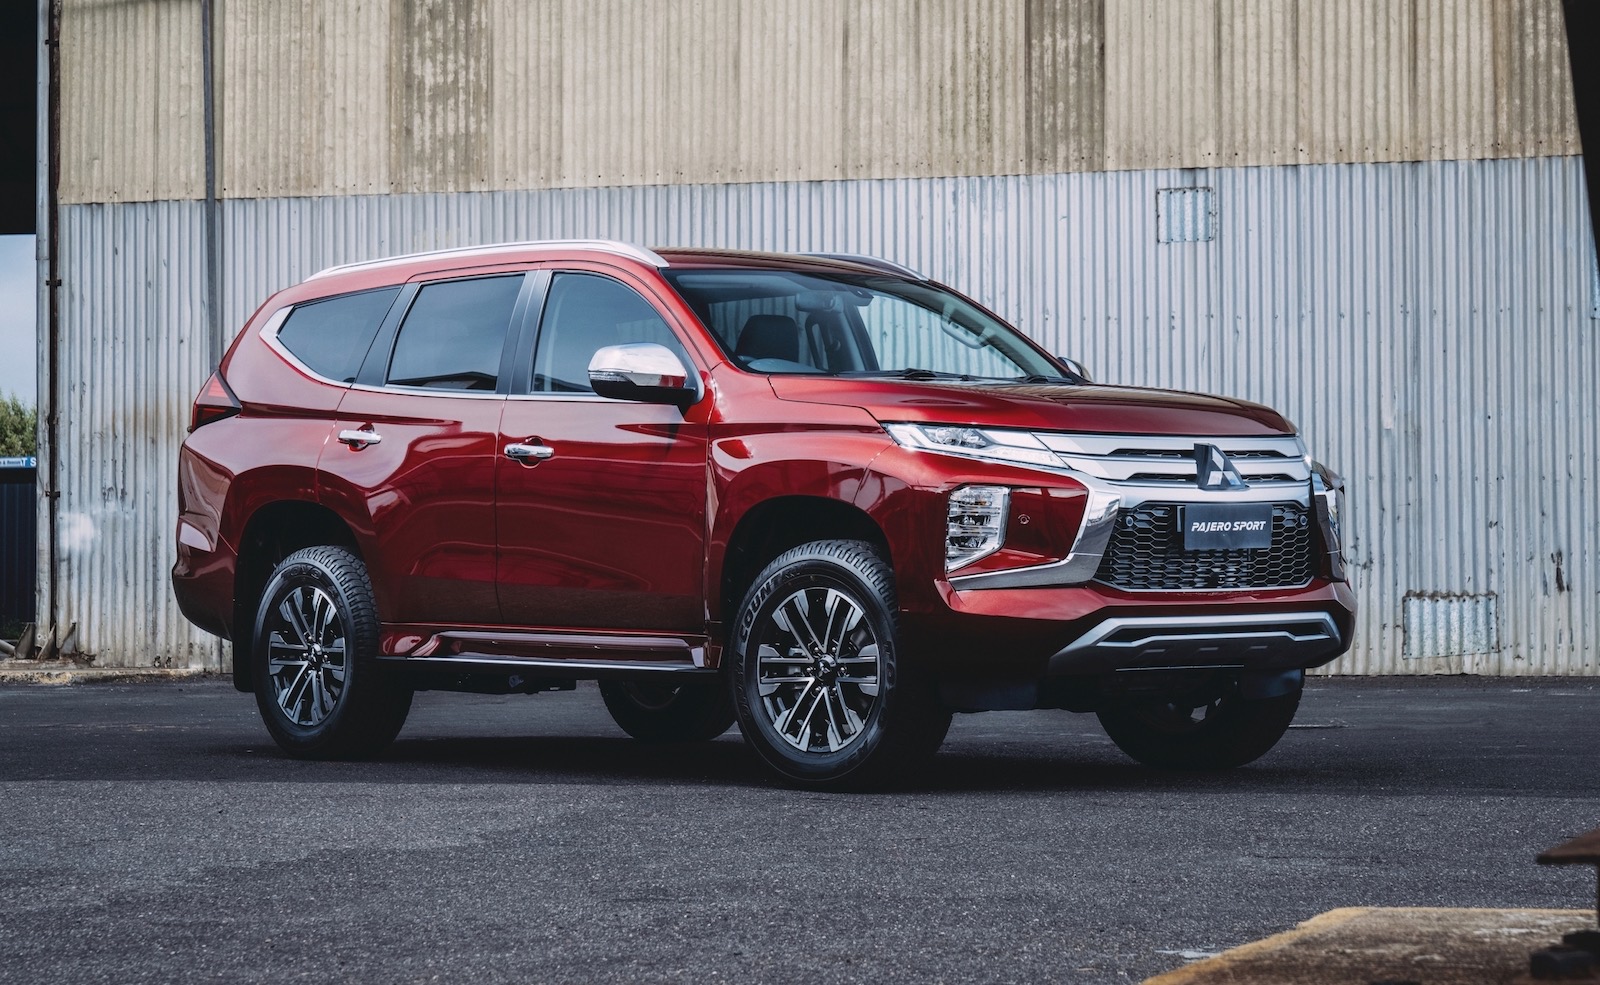 Mitsubishi Pajero Sport Exceed 2020 - Cars Trend Today